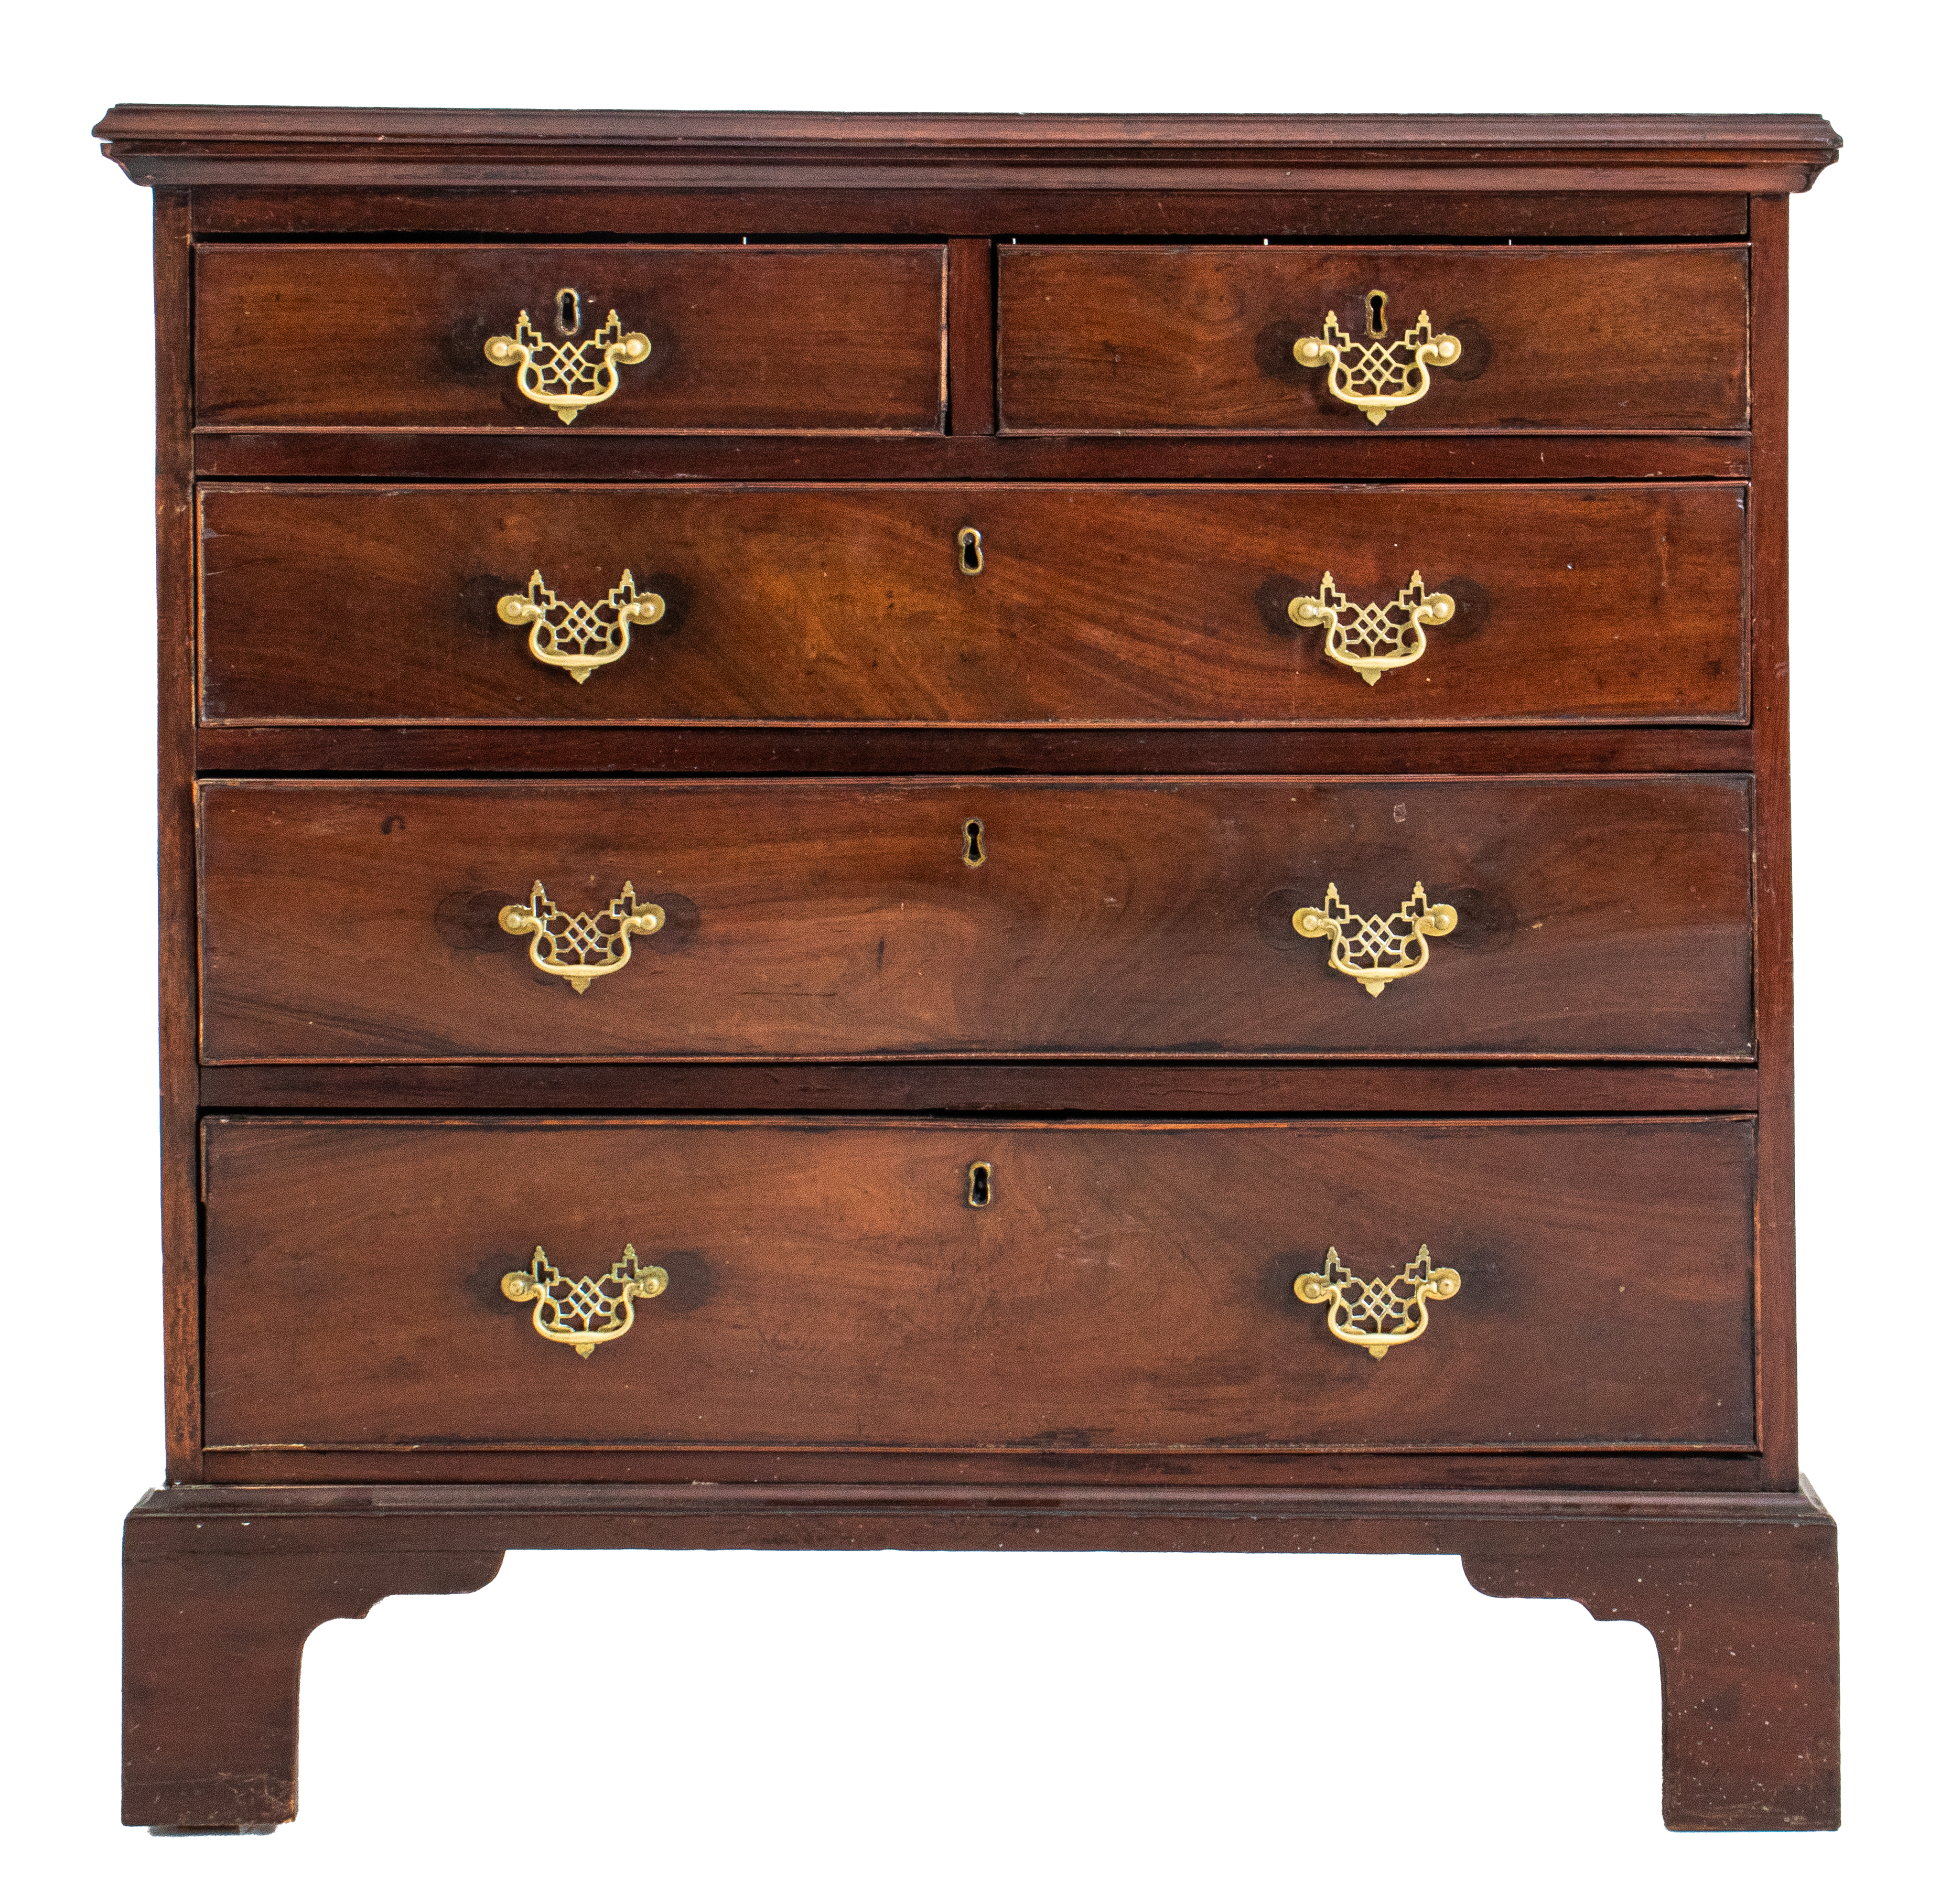 GEORGE III MAHOGANY CHEST OF DRAWERS 2be1c3